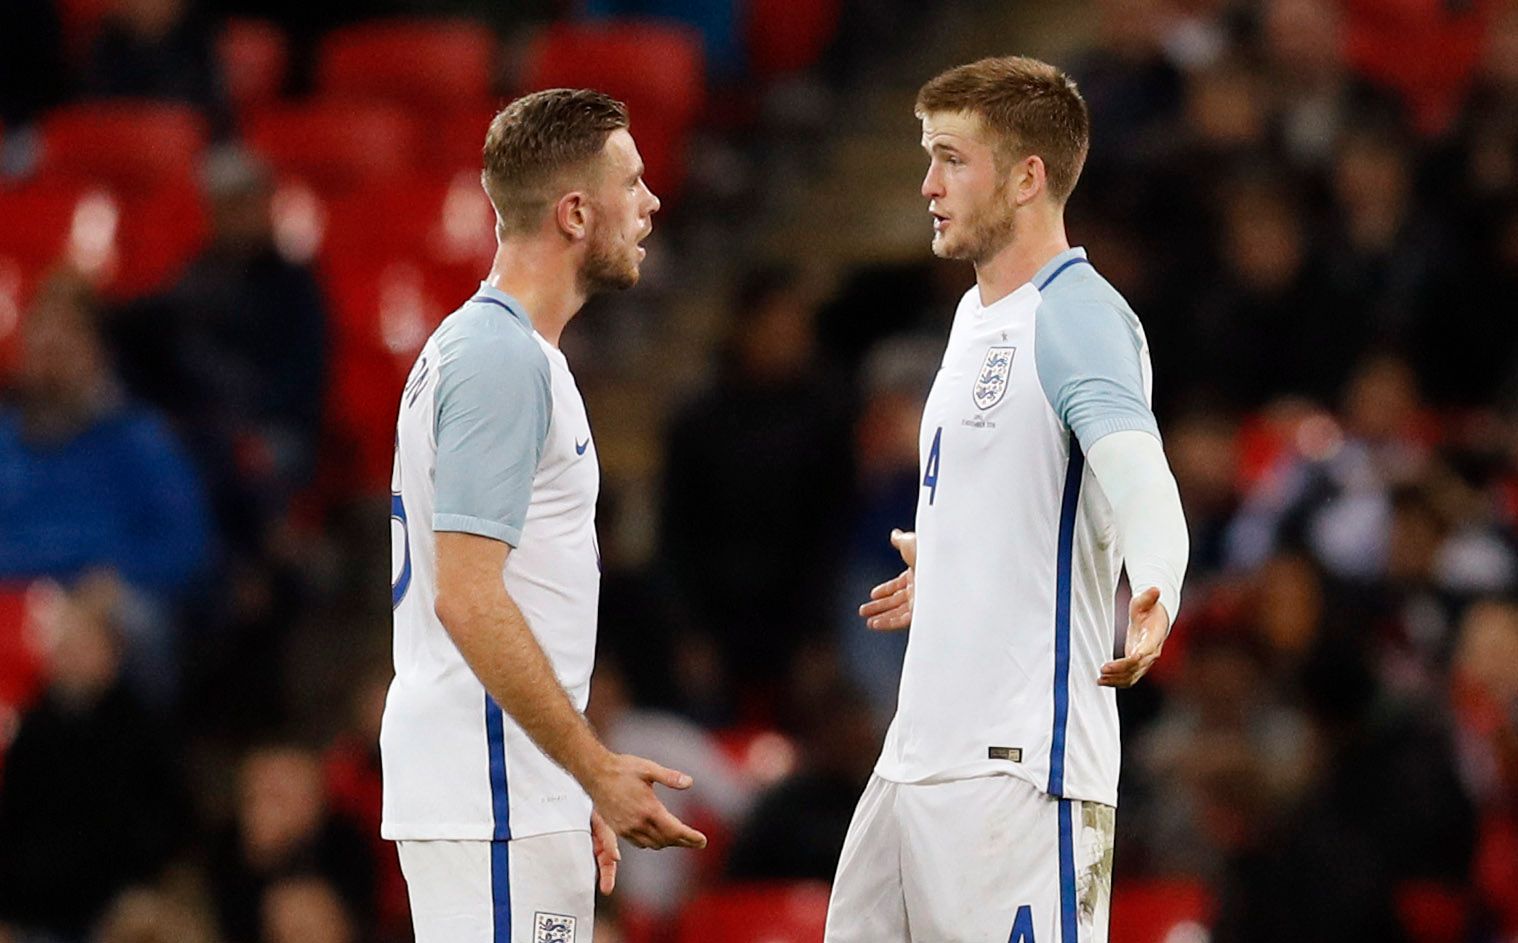 Britain Football Soccer - England v Spain - International Friendly - Wembley Stadium - 15/11/16 England's Jordan Henderson and Eric Dier look dejected after the game  Reuters / Darren Staples Livepic EDITORIAL USE ONLY.